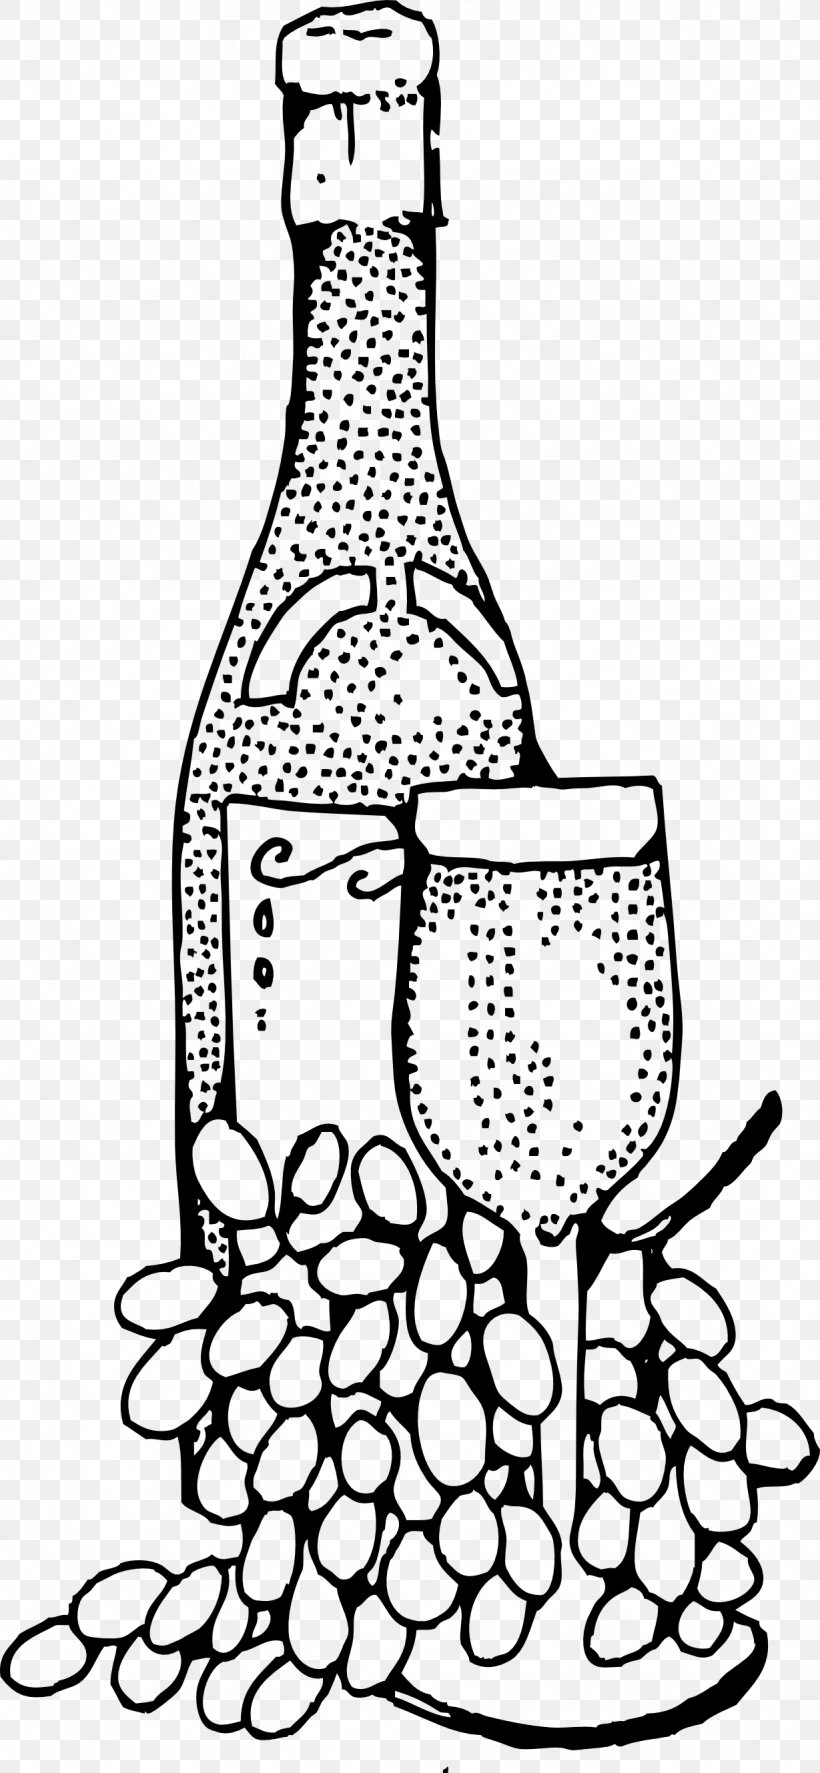 Wine Bottle Ready-to-Use Food And Drink Spot Illustrations Clip Art, PNG, 1229x2658px, Wine, Beer, Black And White, Bottle, Drawing Download Free